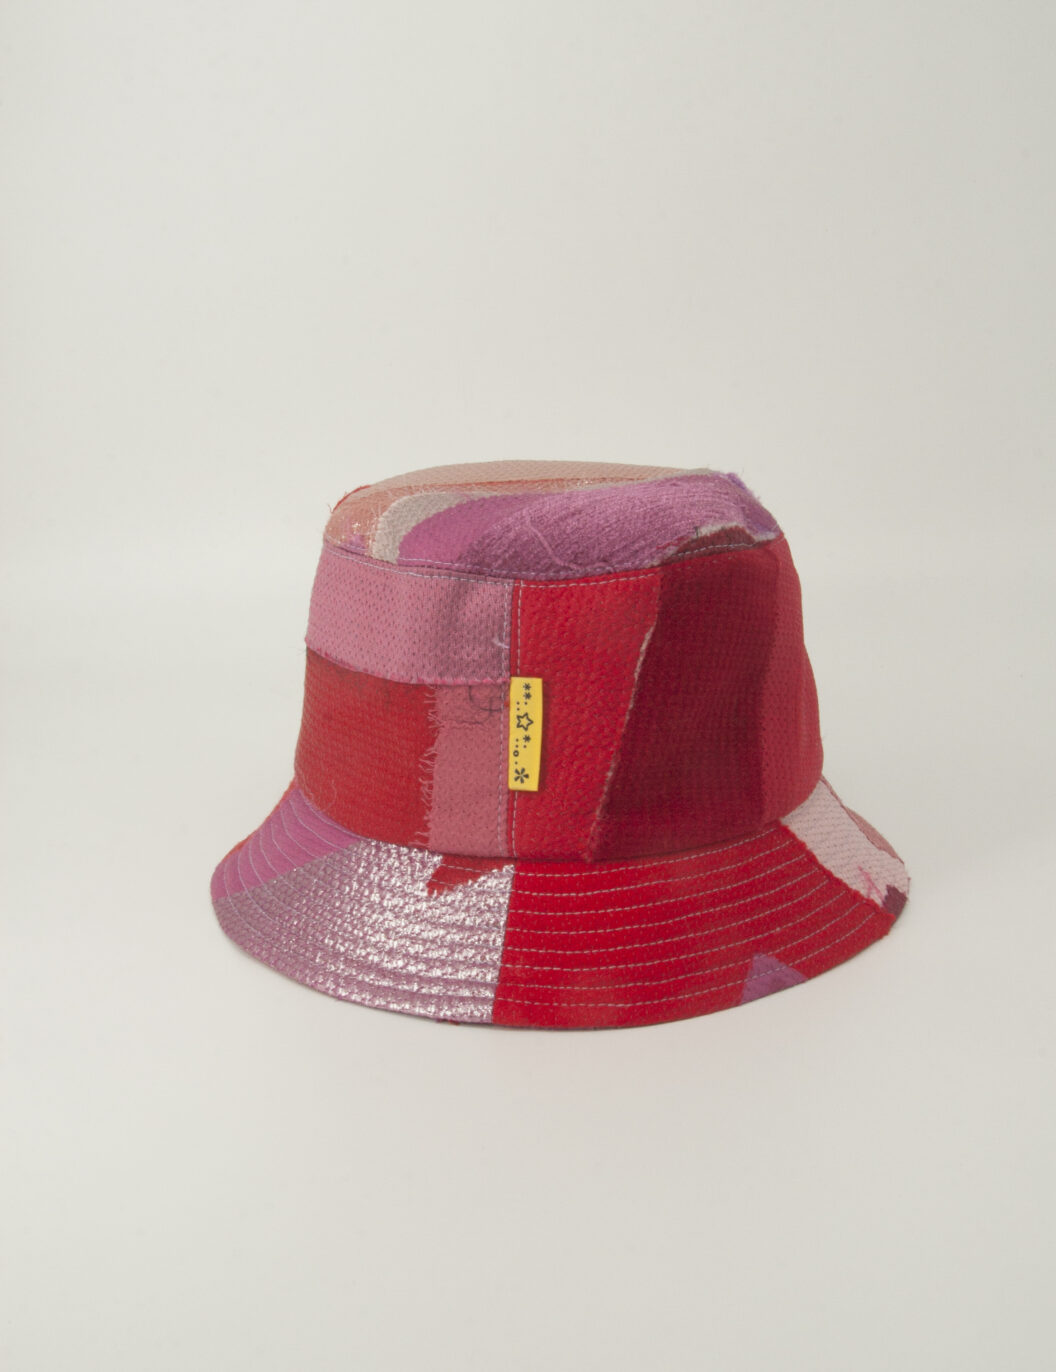 Scrap Bucket Hat in pink and red combo